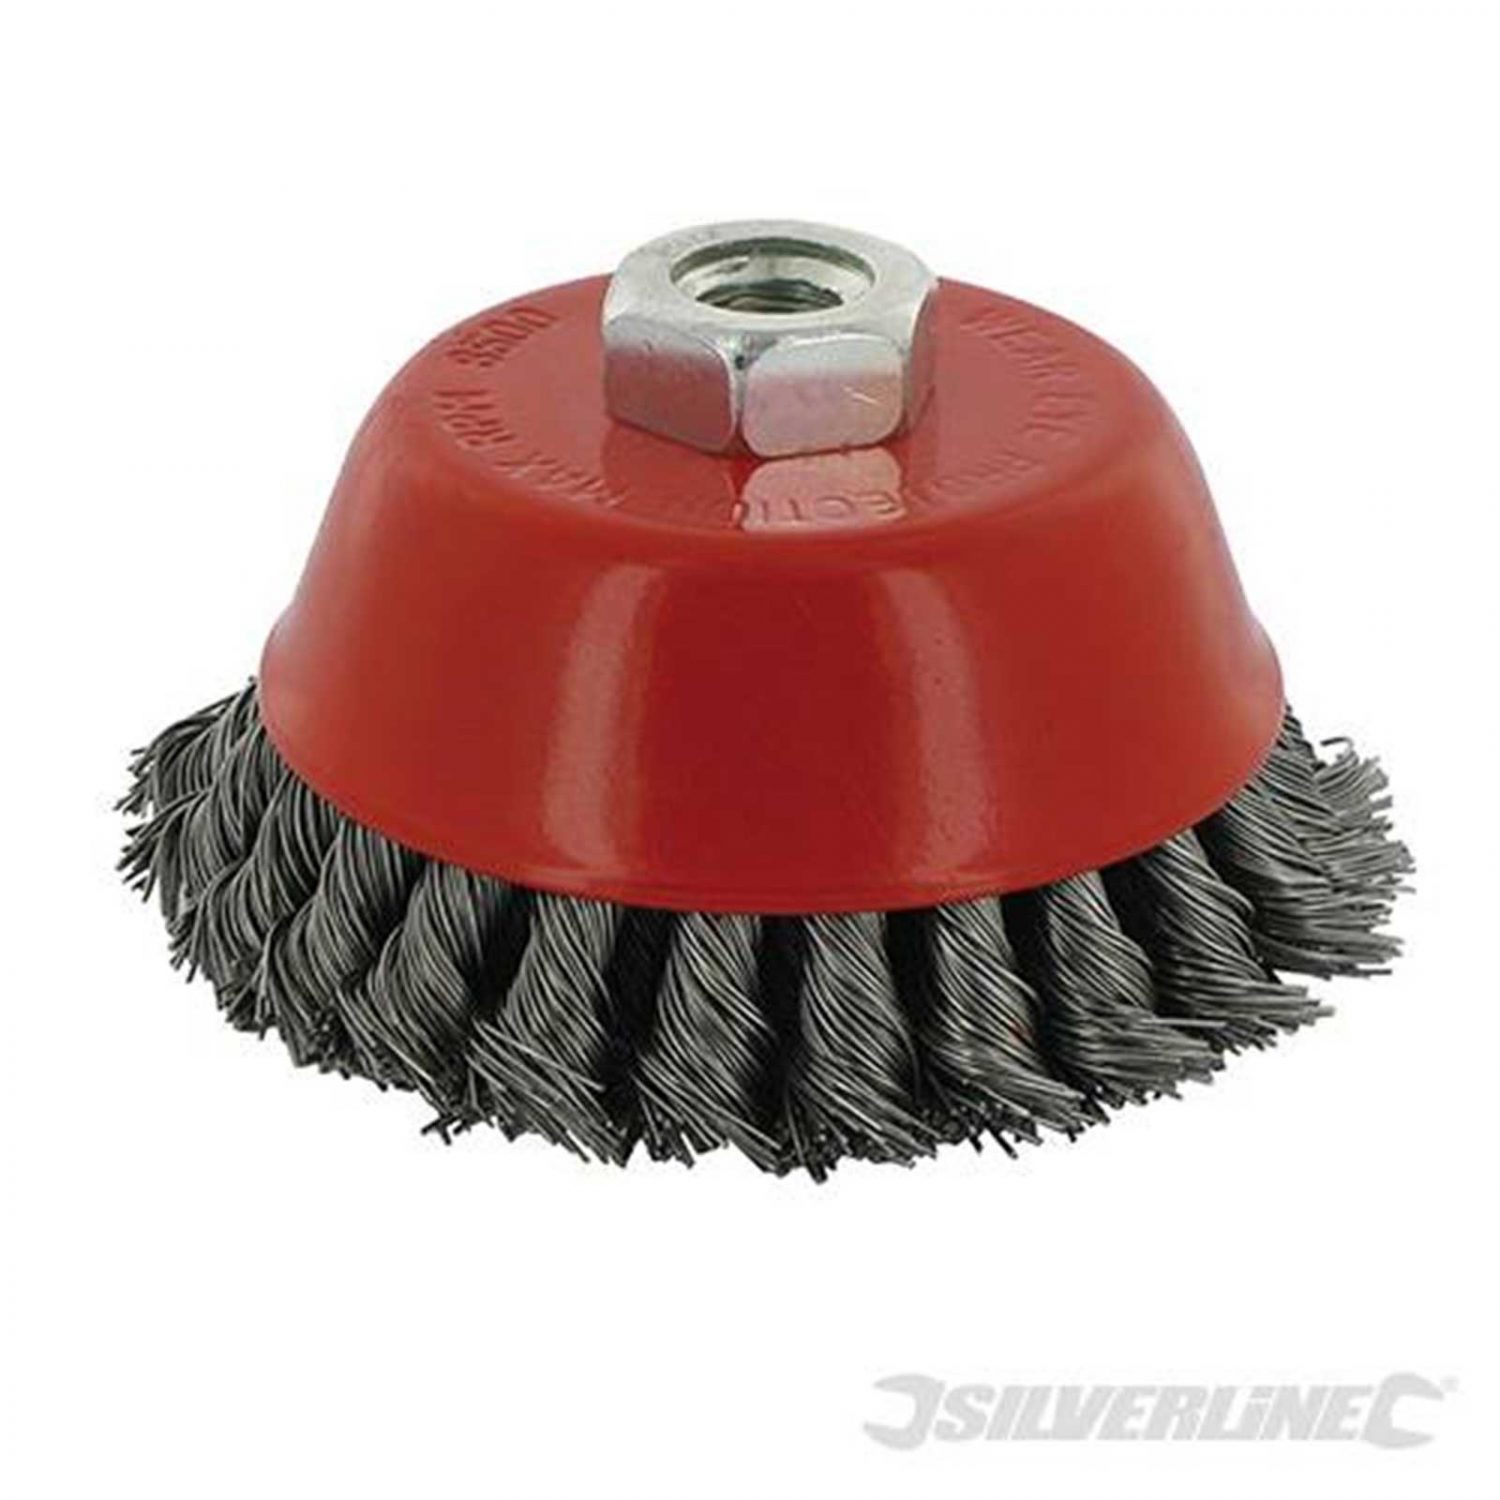 TWIST KNOT BOWL CUP BRUSH WHEELS FOR GRINDER OR DRILL - Rustbuster